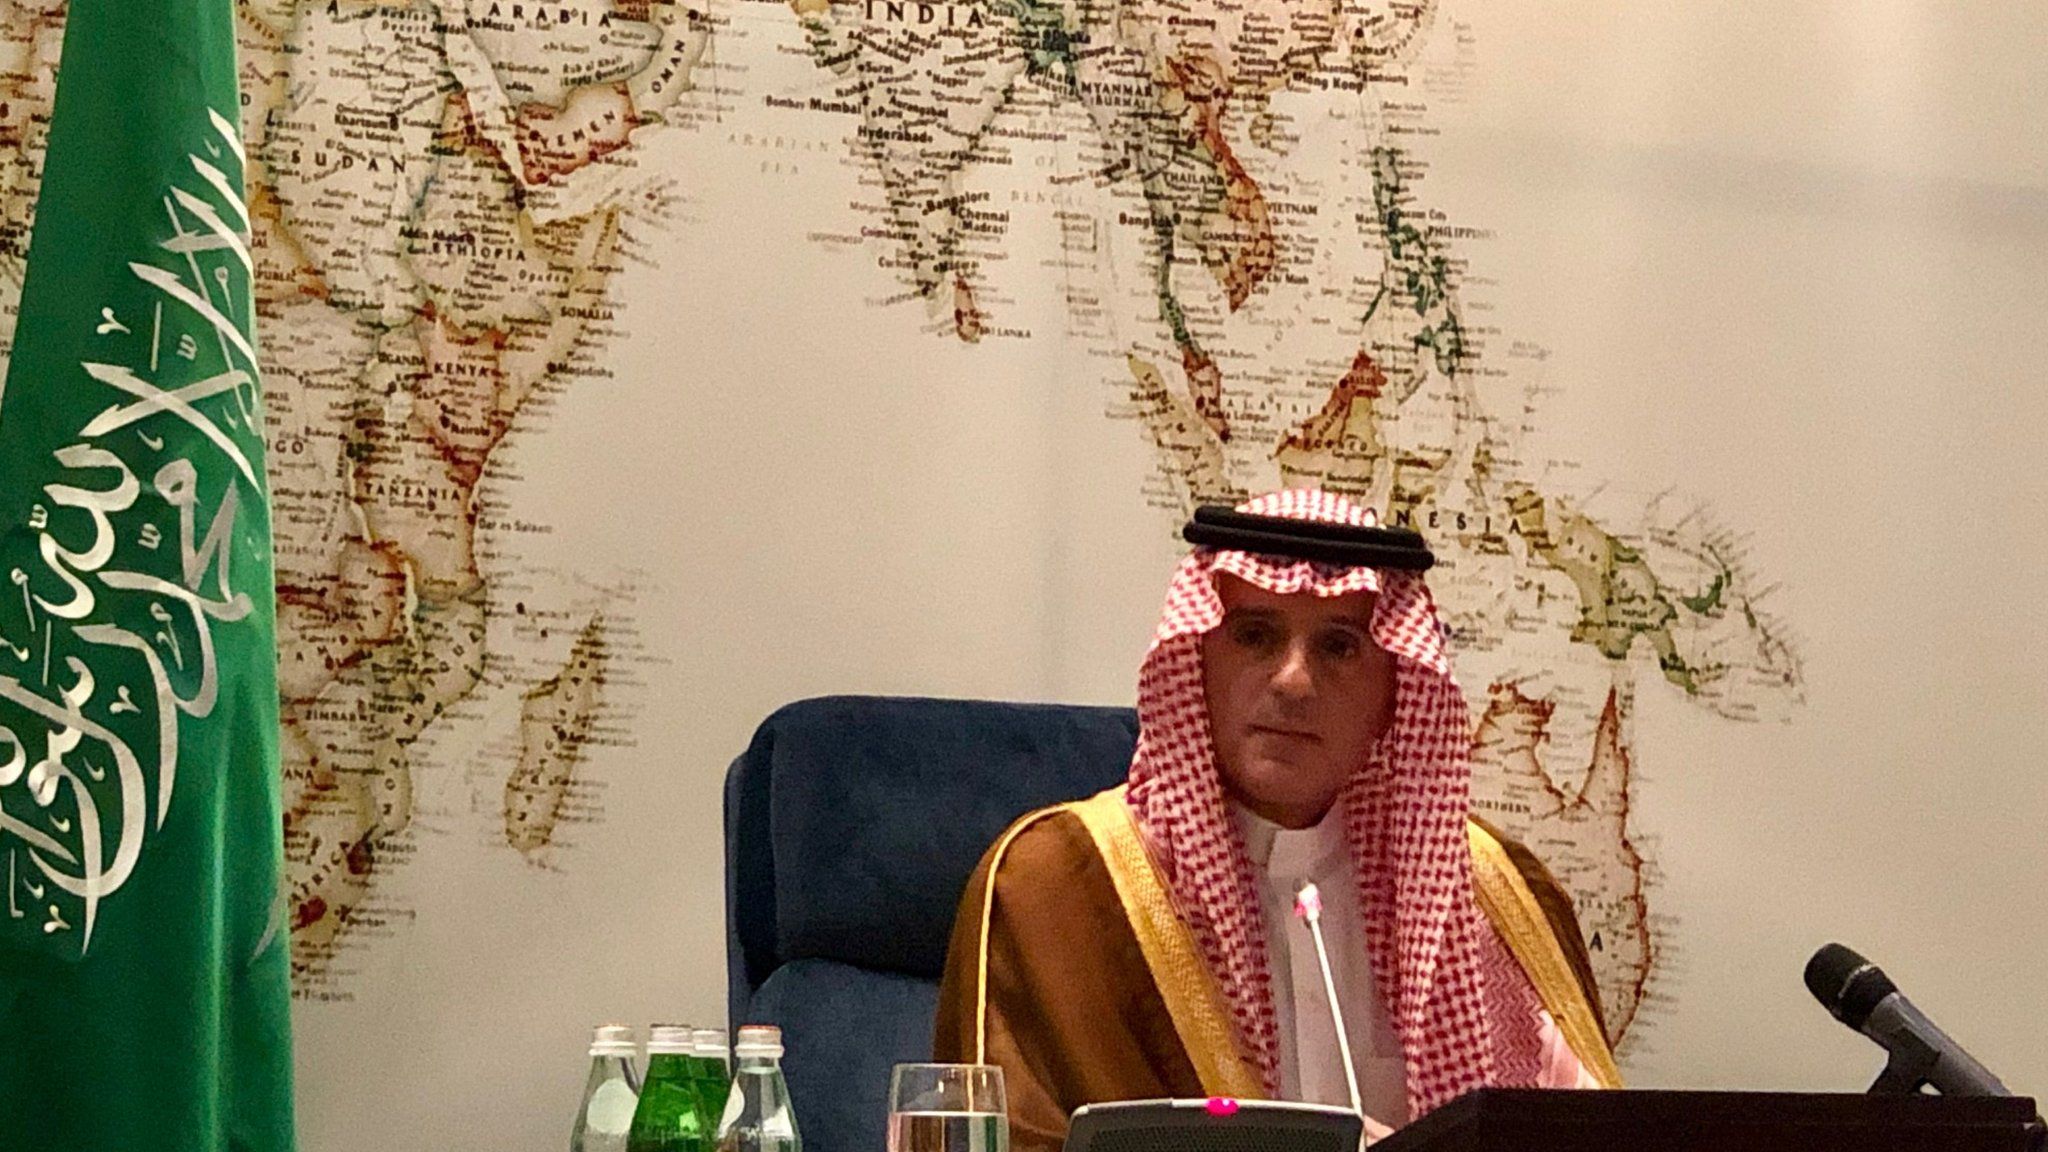 Sauid Minister of State for Foreign Affairs Adel al-Jubeir giving a press conference about the oil attacks on 21 September 2019